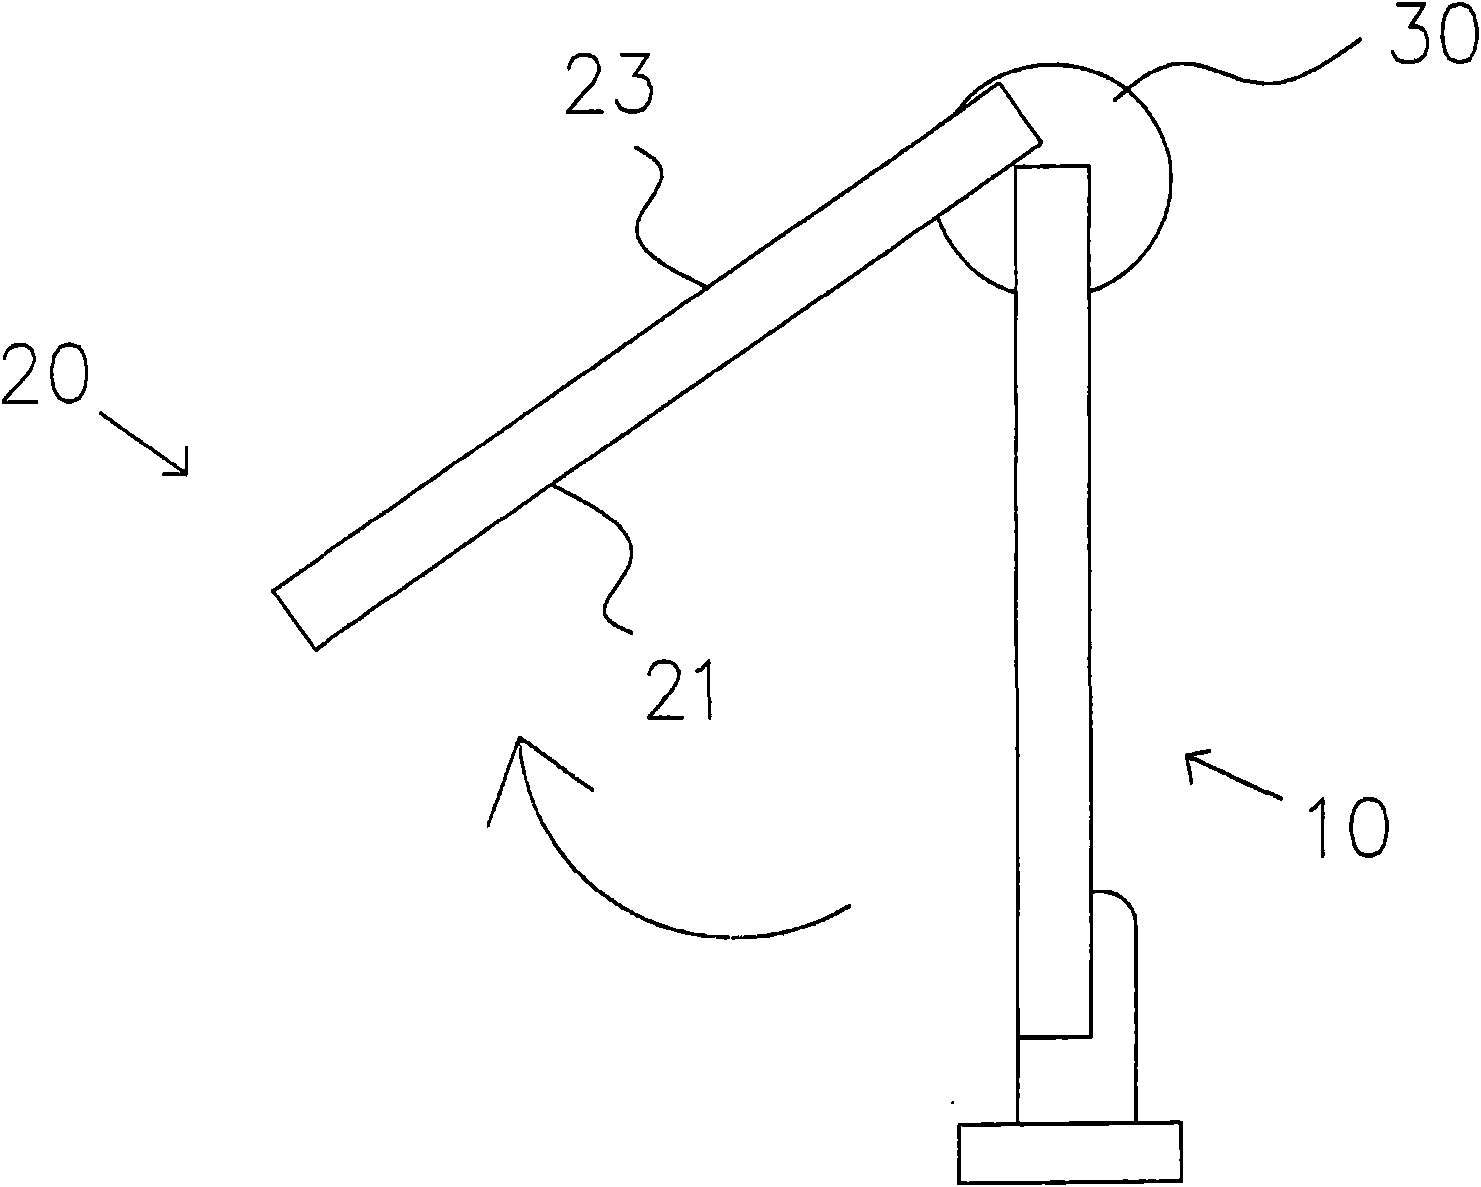 Display with multi-directional rotary double-screen structure